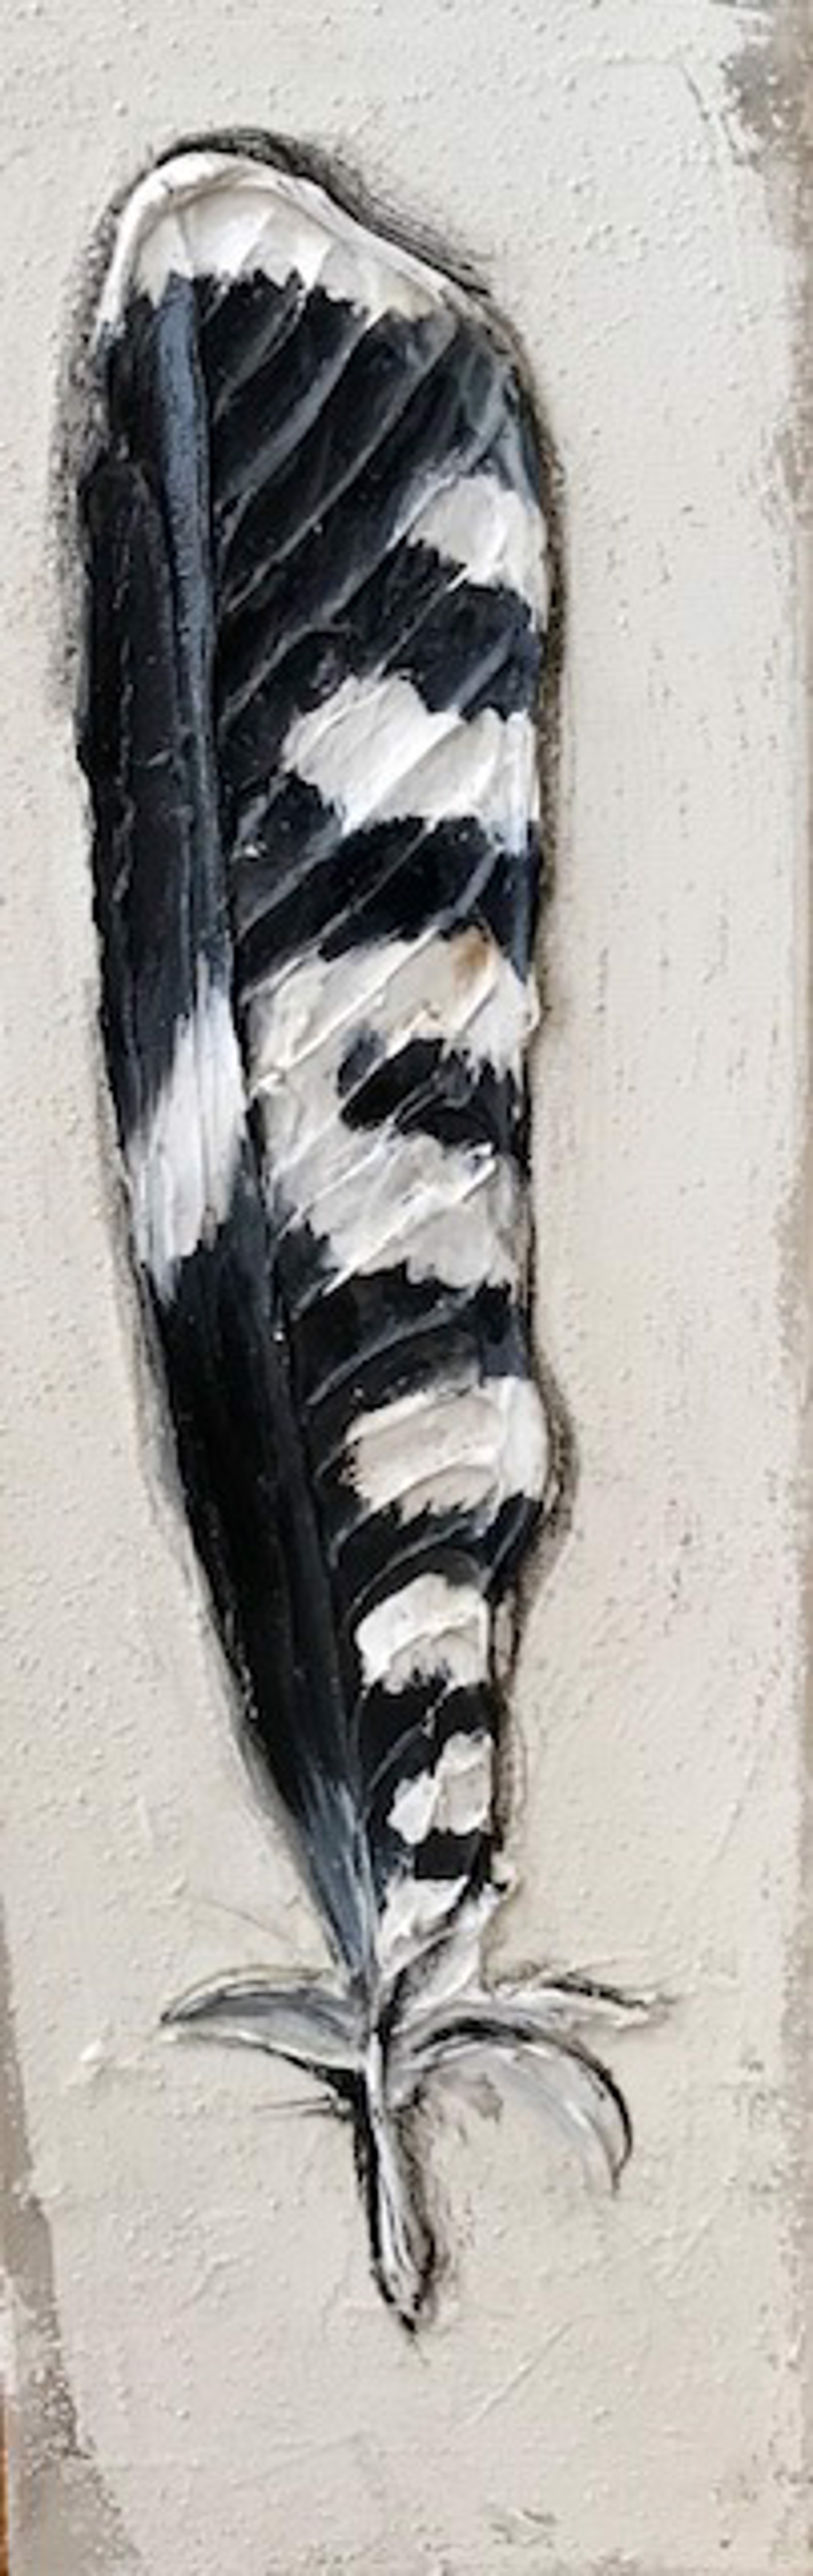 Woodpecker by Sherry Cook